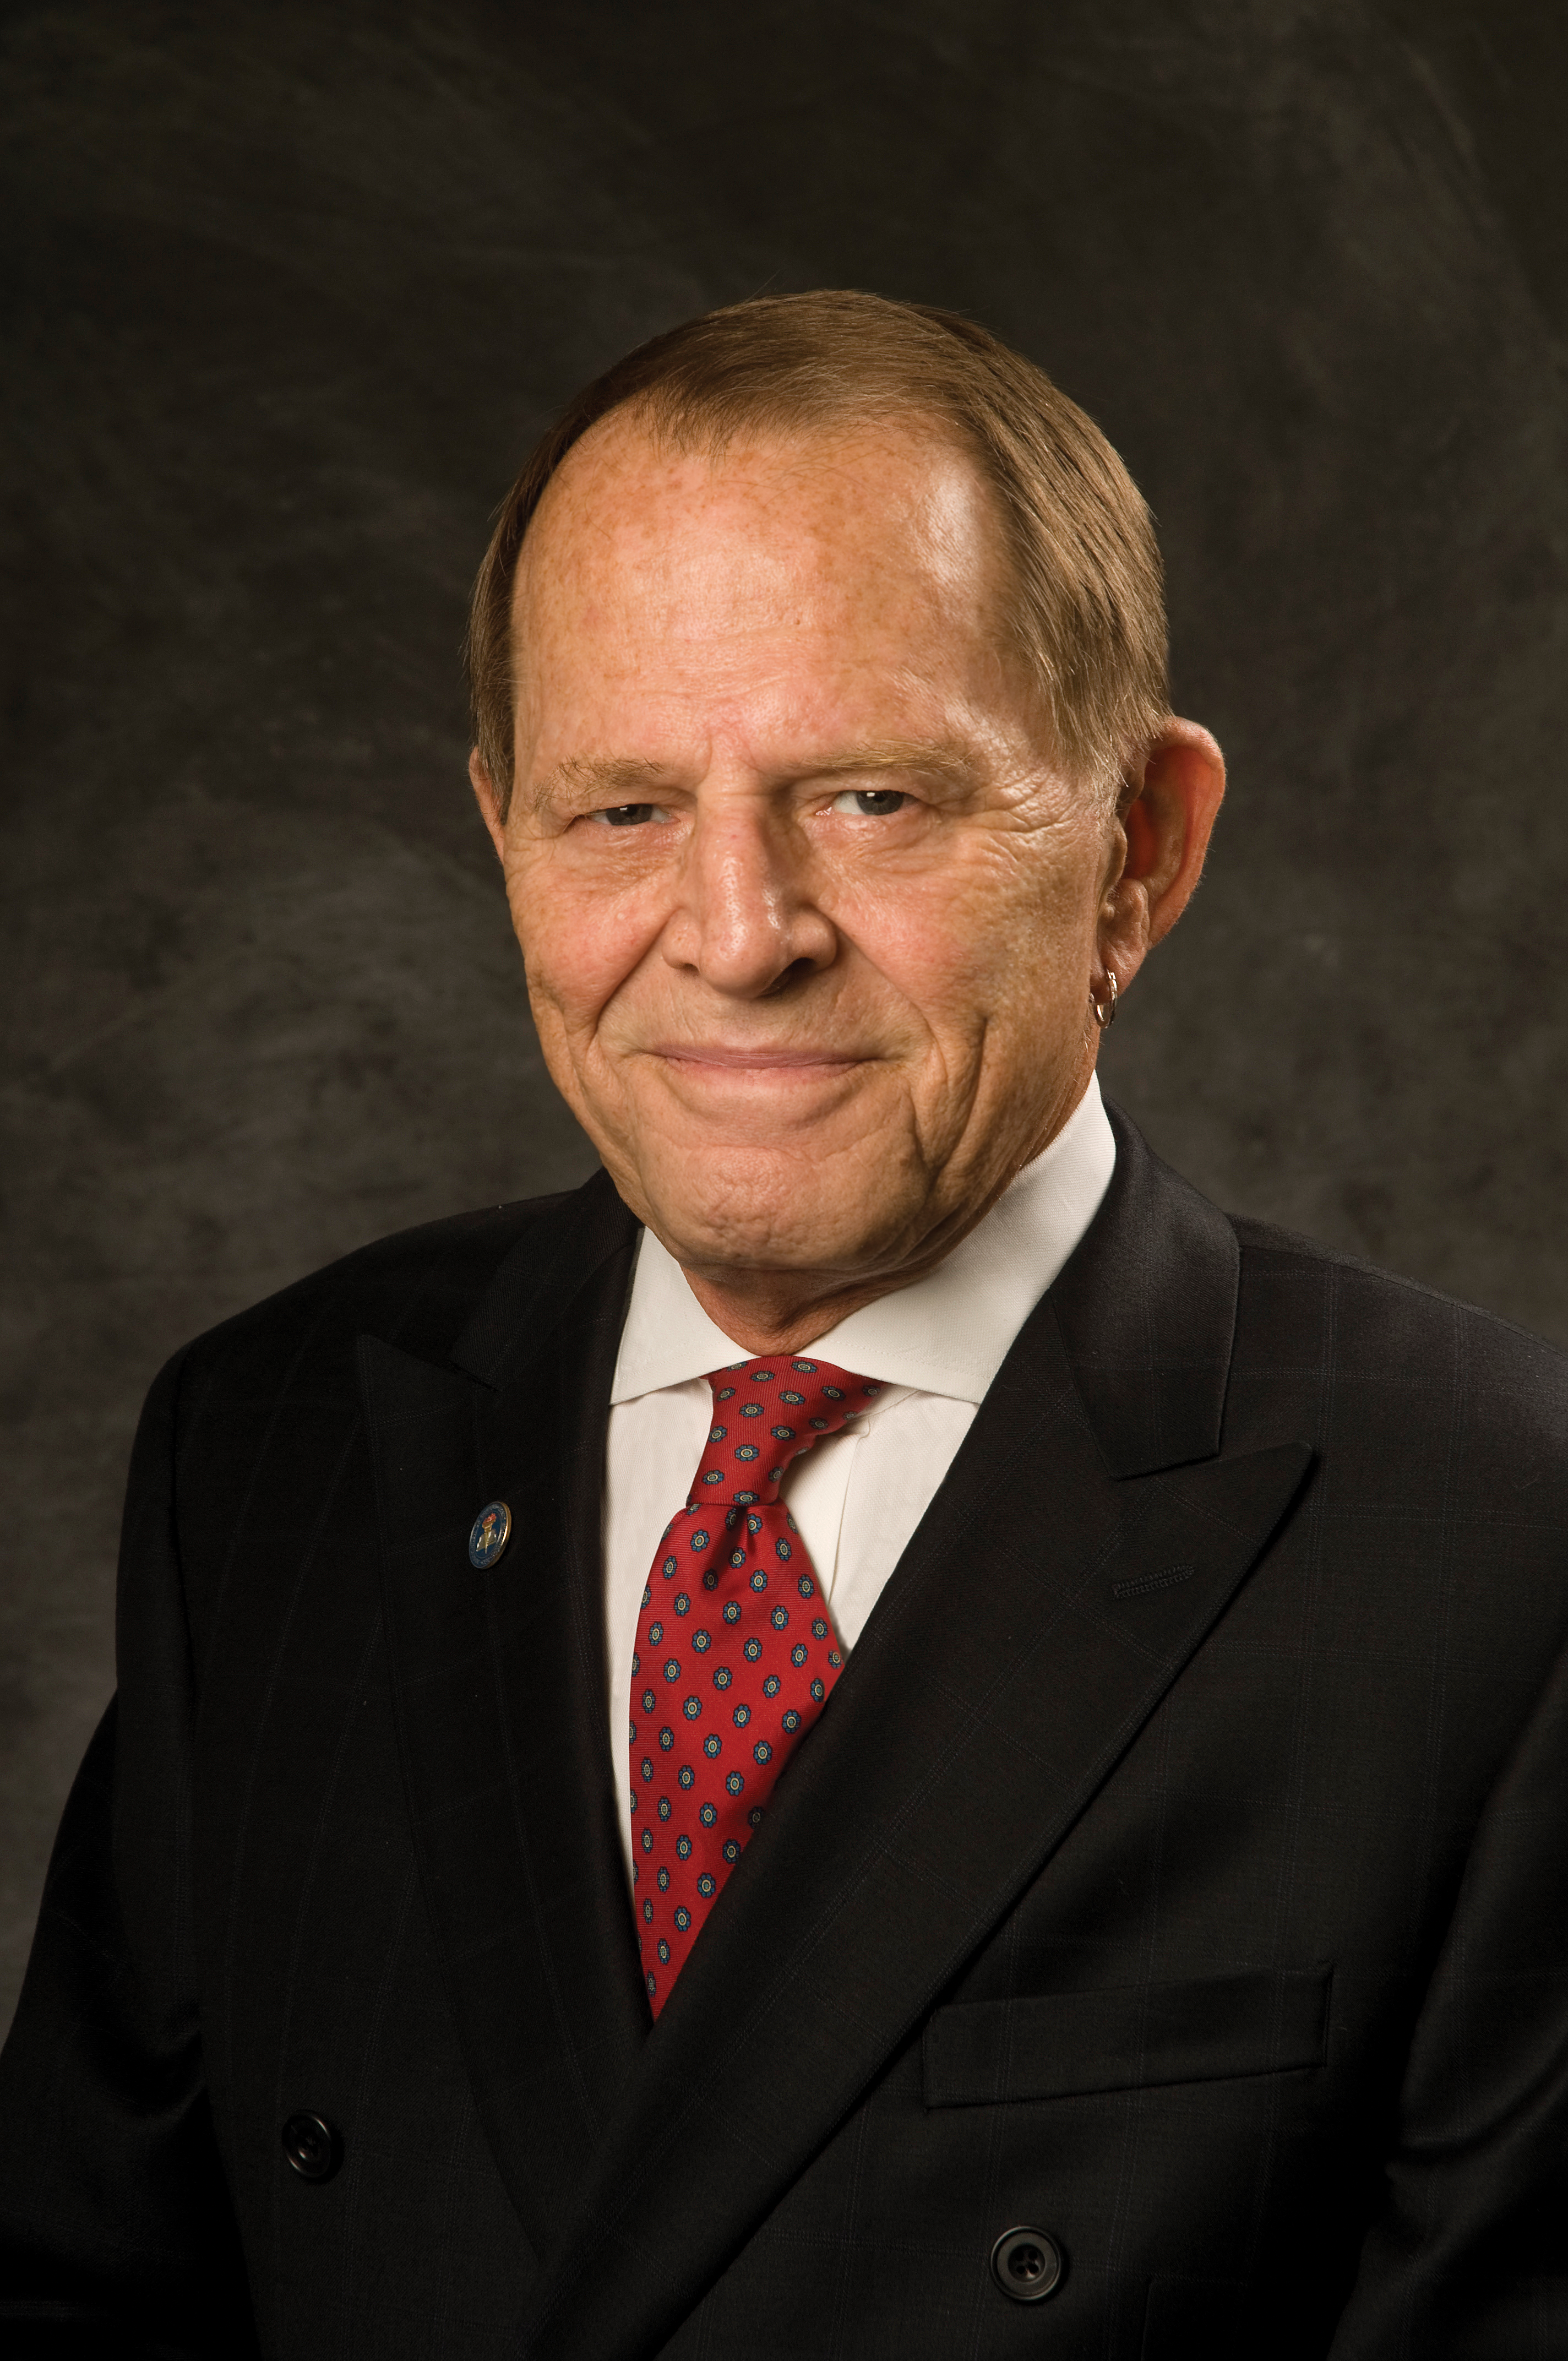 Owner and Chairman Dr. Joseph T. Wells dressed in black suit and red tie and smiling.